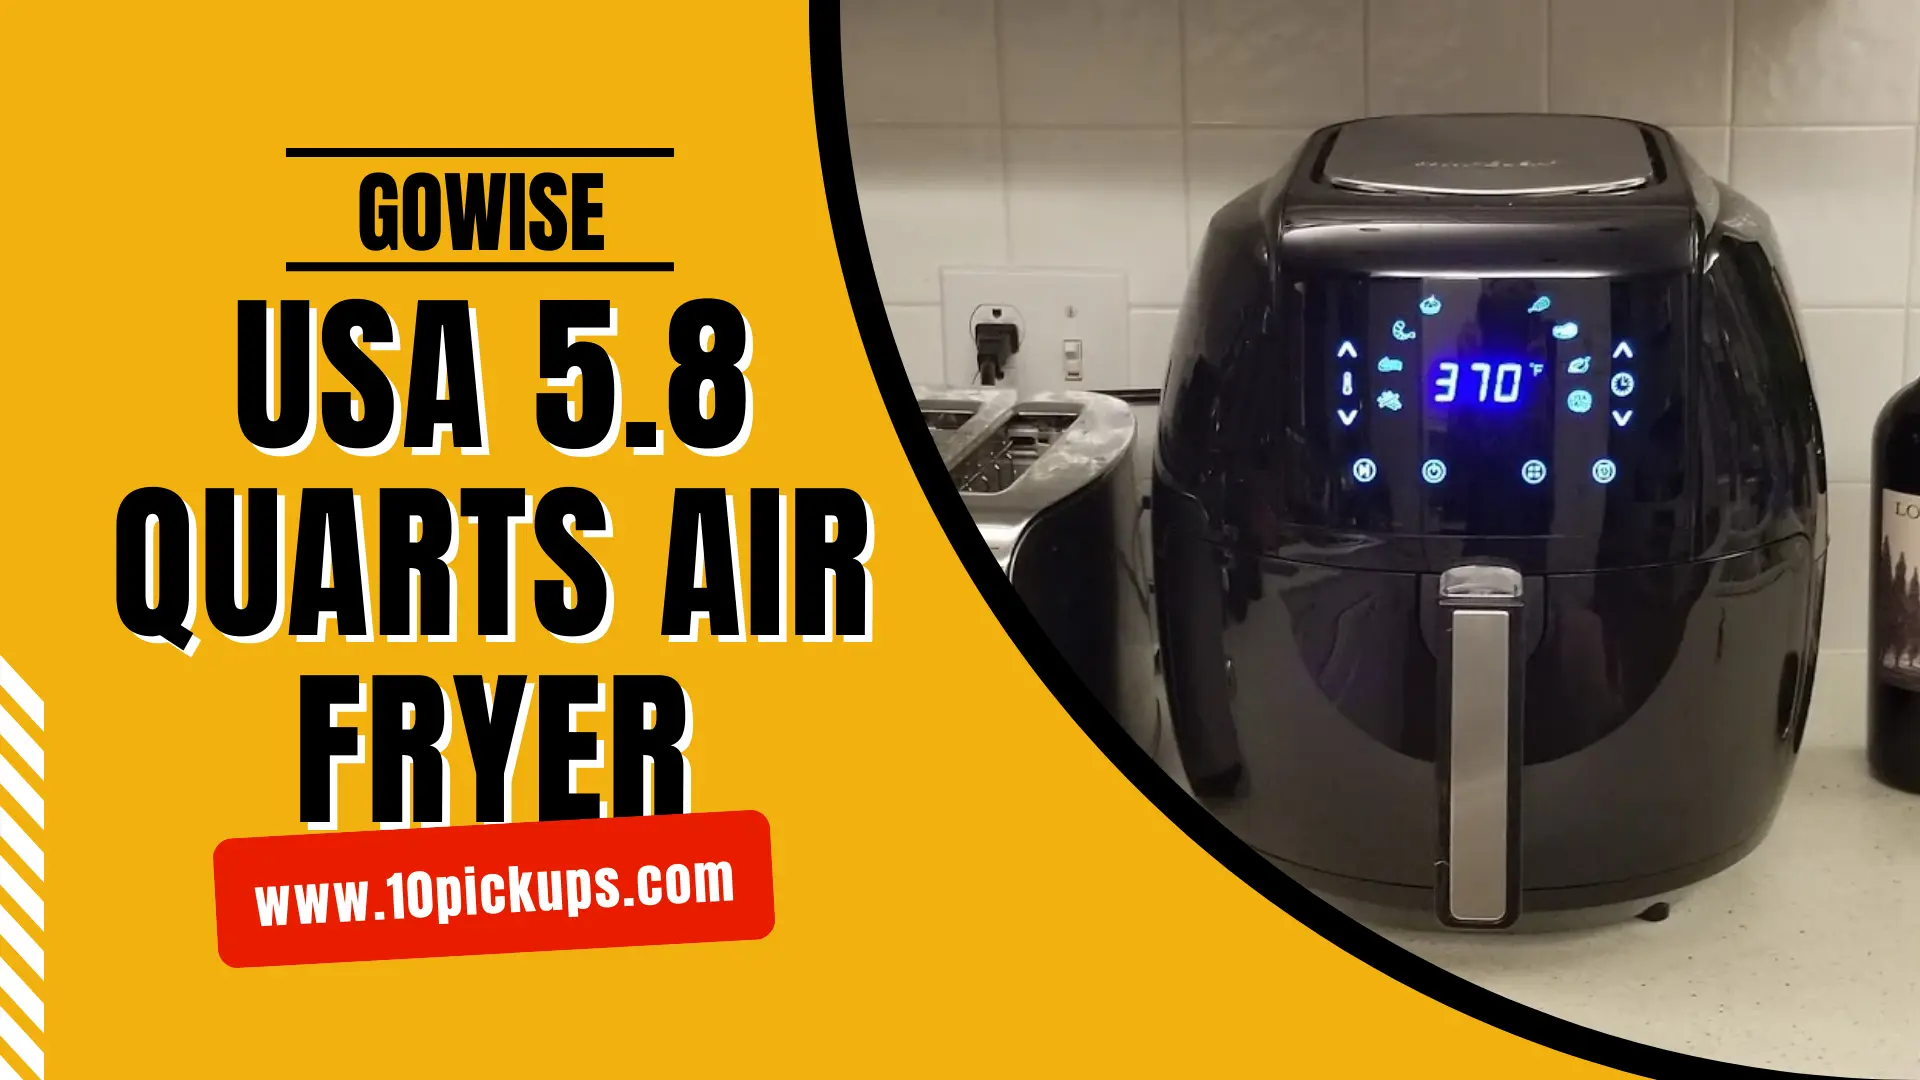 GoWISE USA 5.8 Quarts Air Fryer Review and Buying Guide